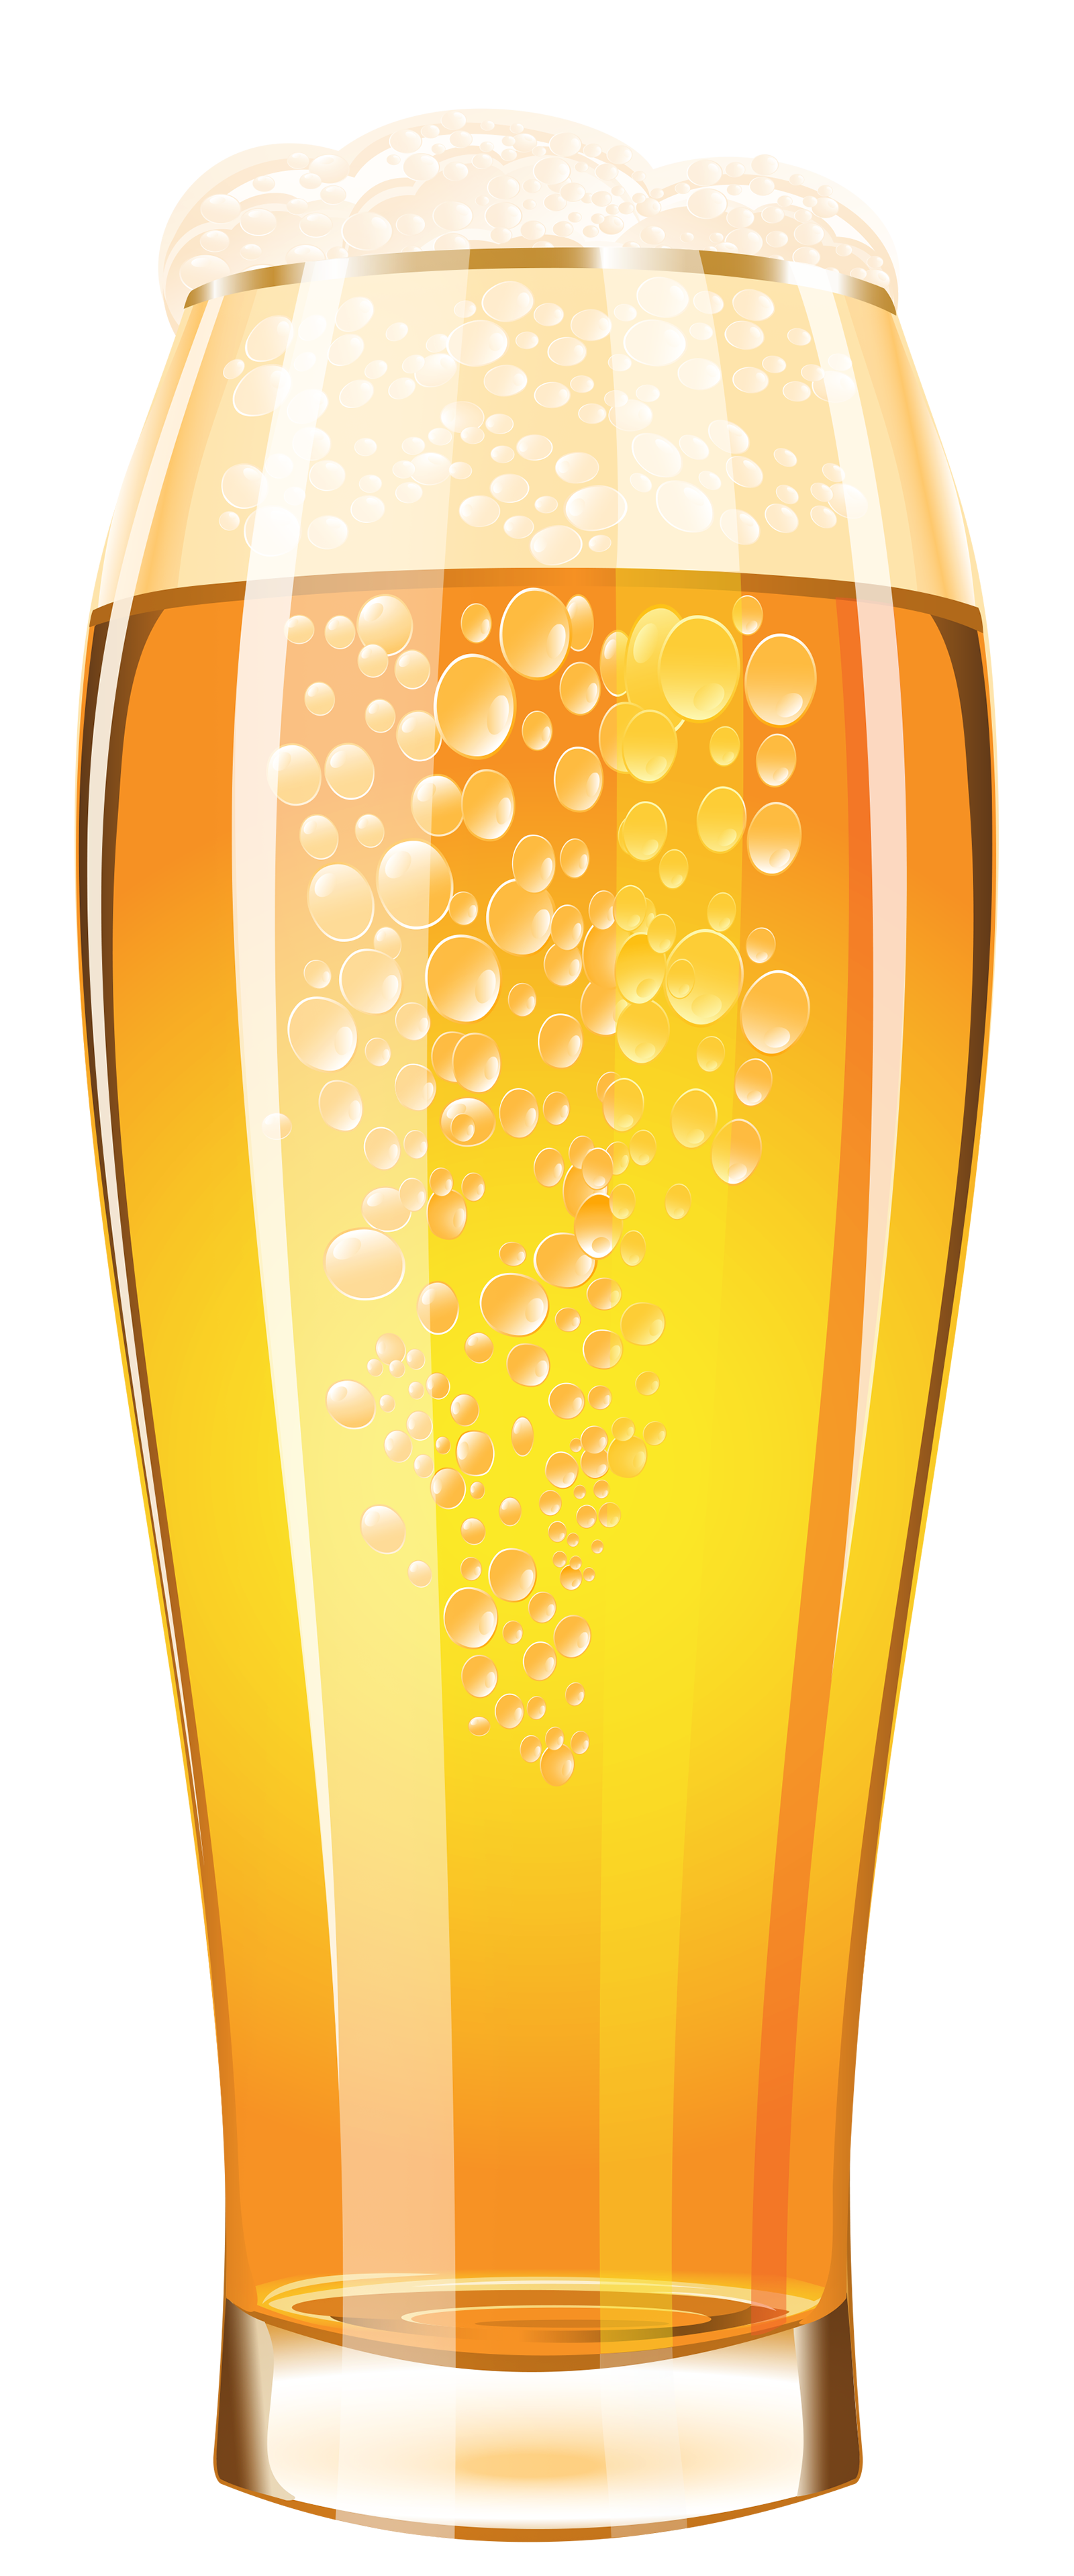 Of beer png vector. Father clipart glass